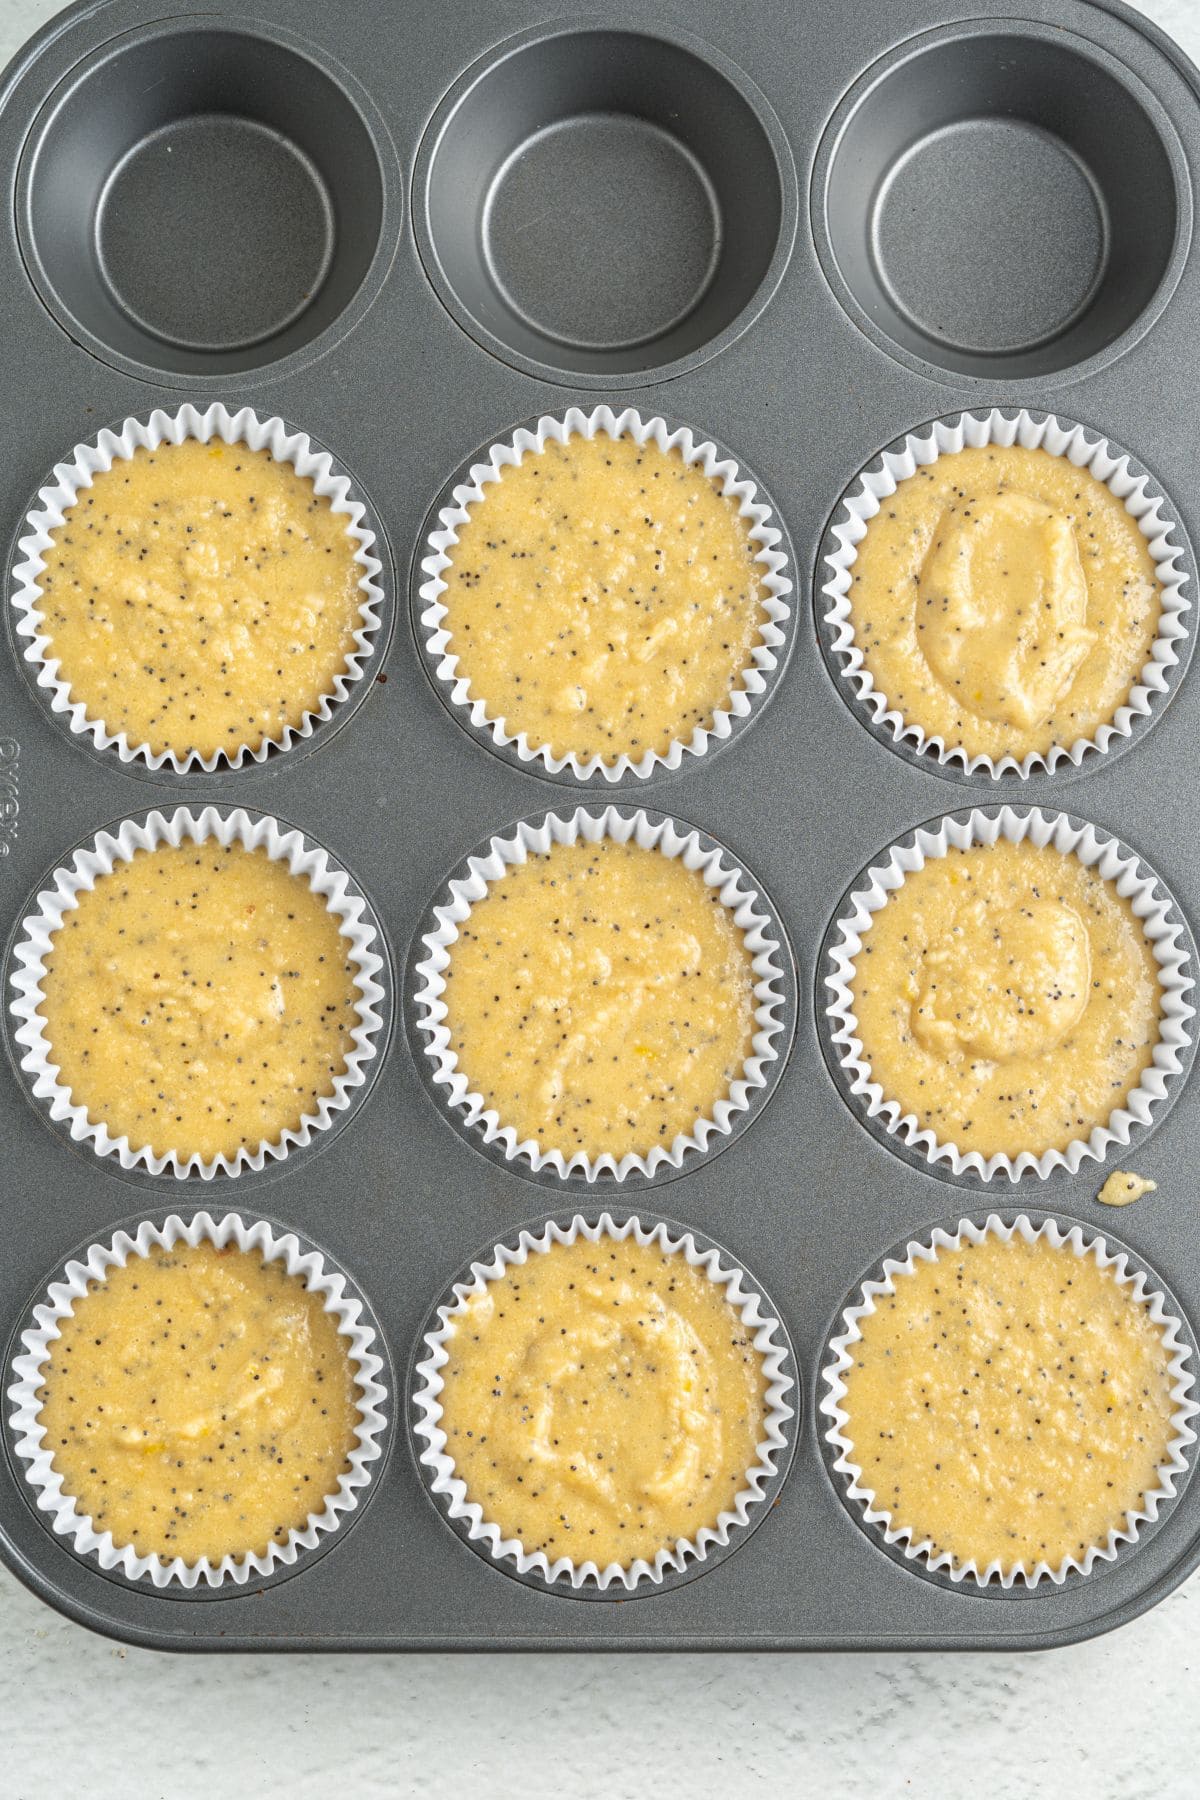 Keto Lemon and Poppy Seed Muffins step 15